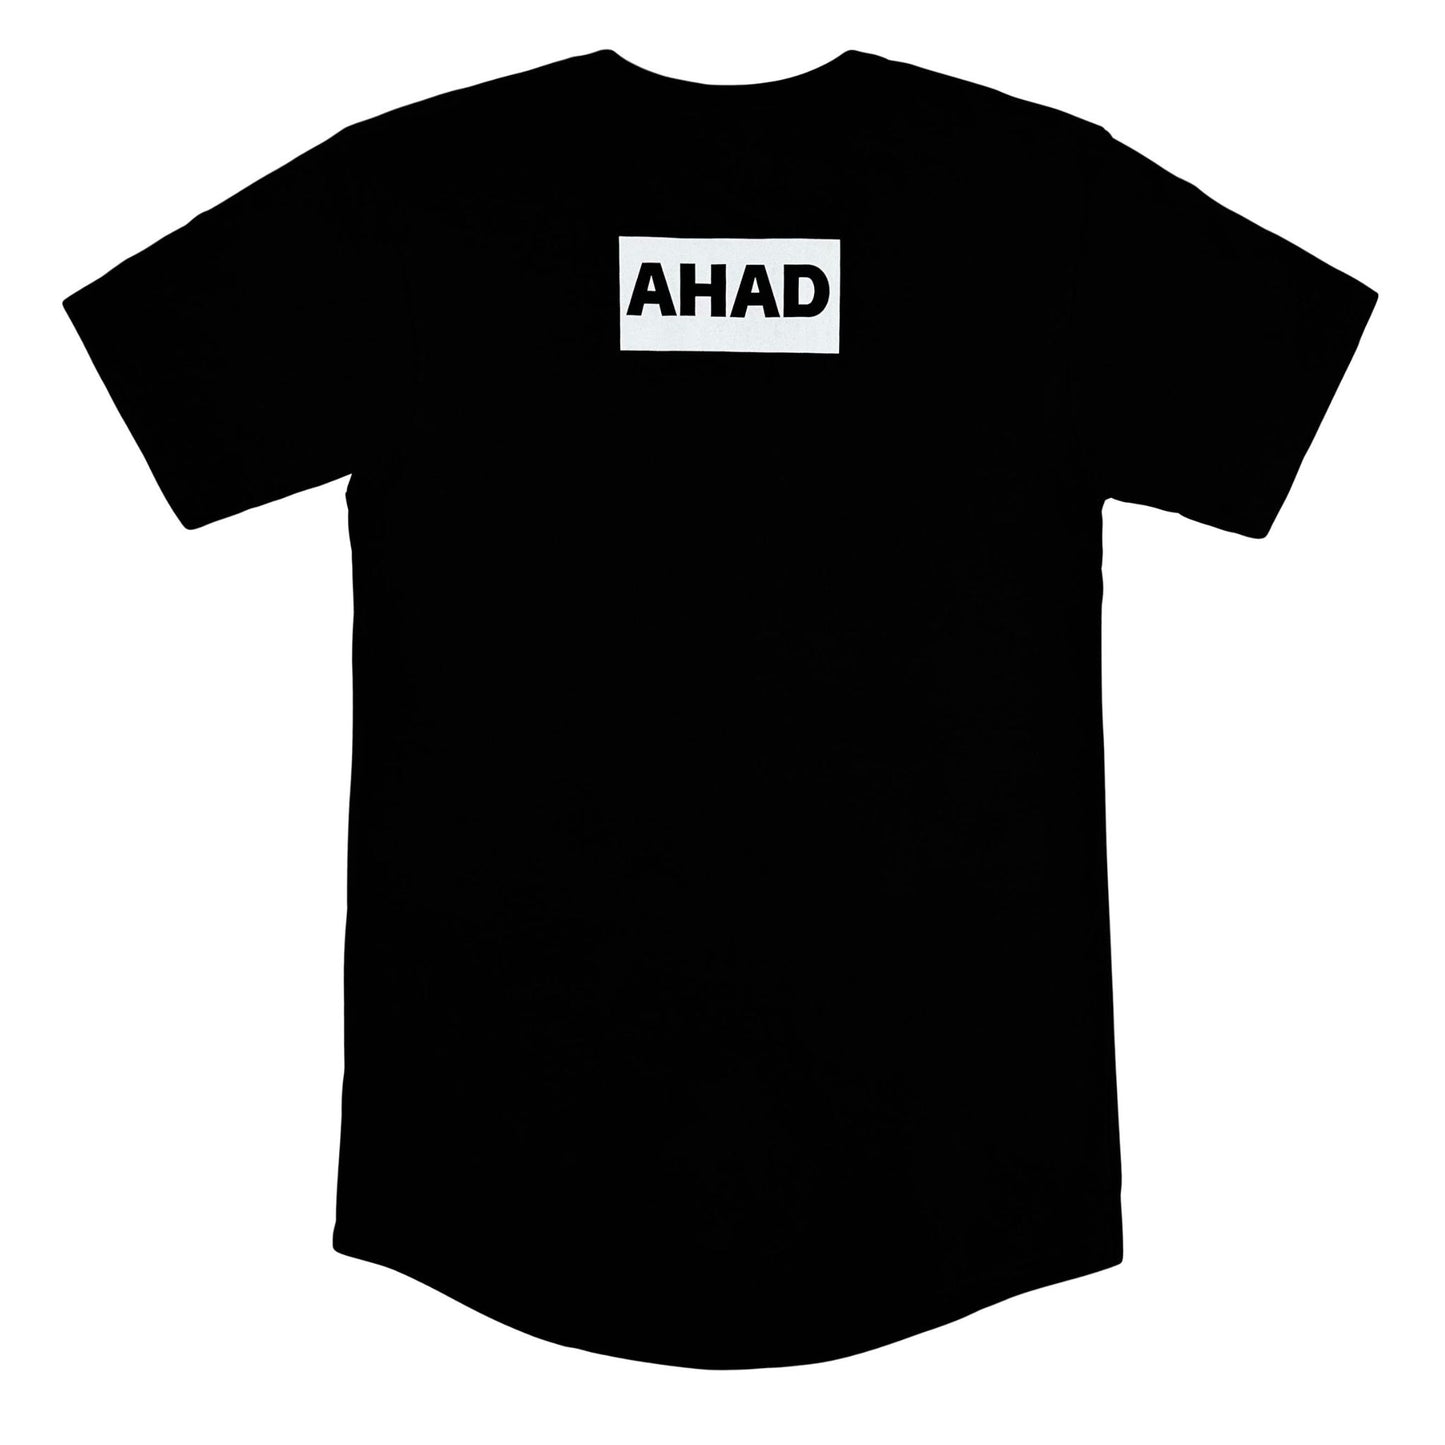 Black long body tee shirt, with scalloped hem, print on the back shows the word "AHAD" cut out of a white rectangle